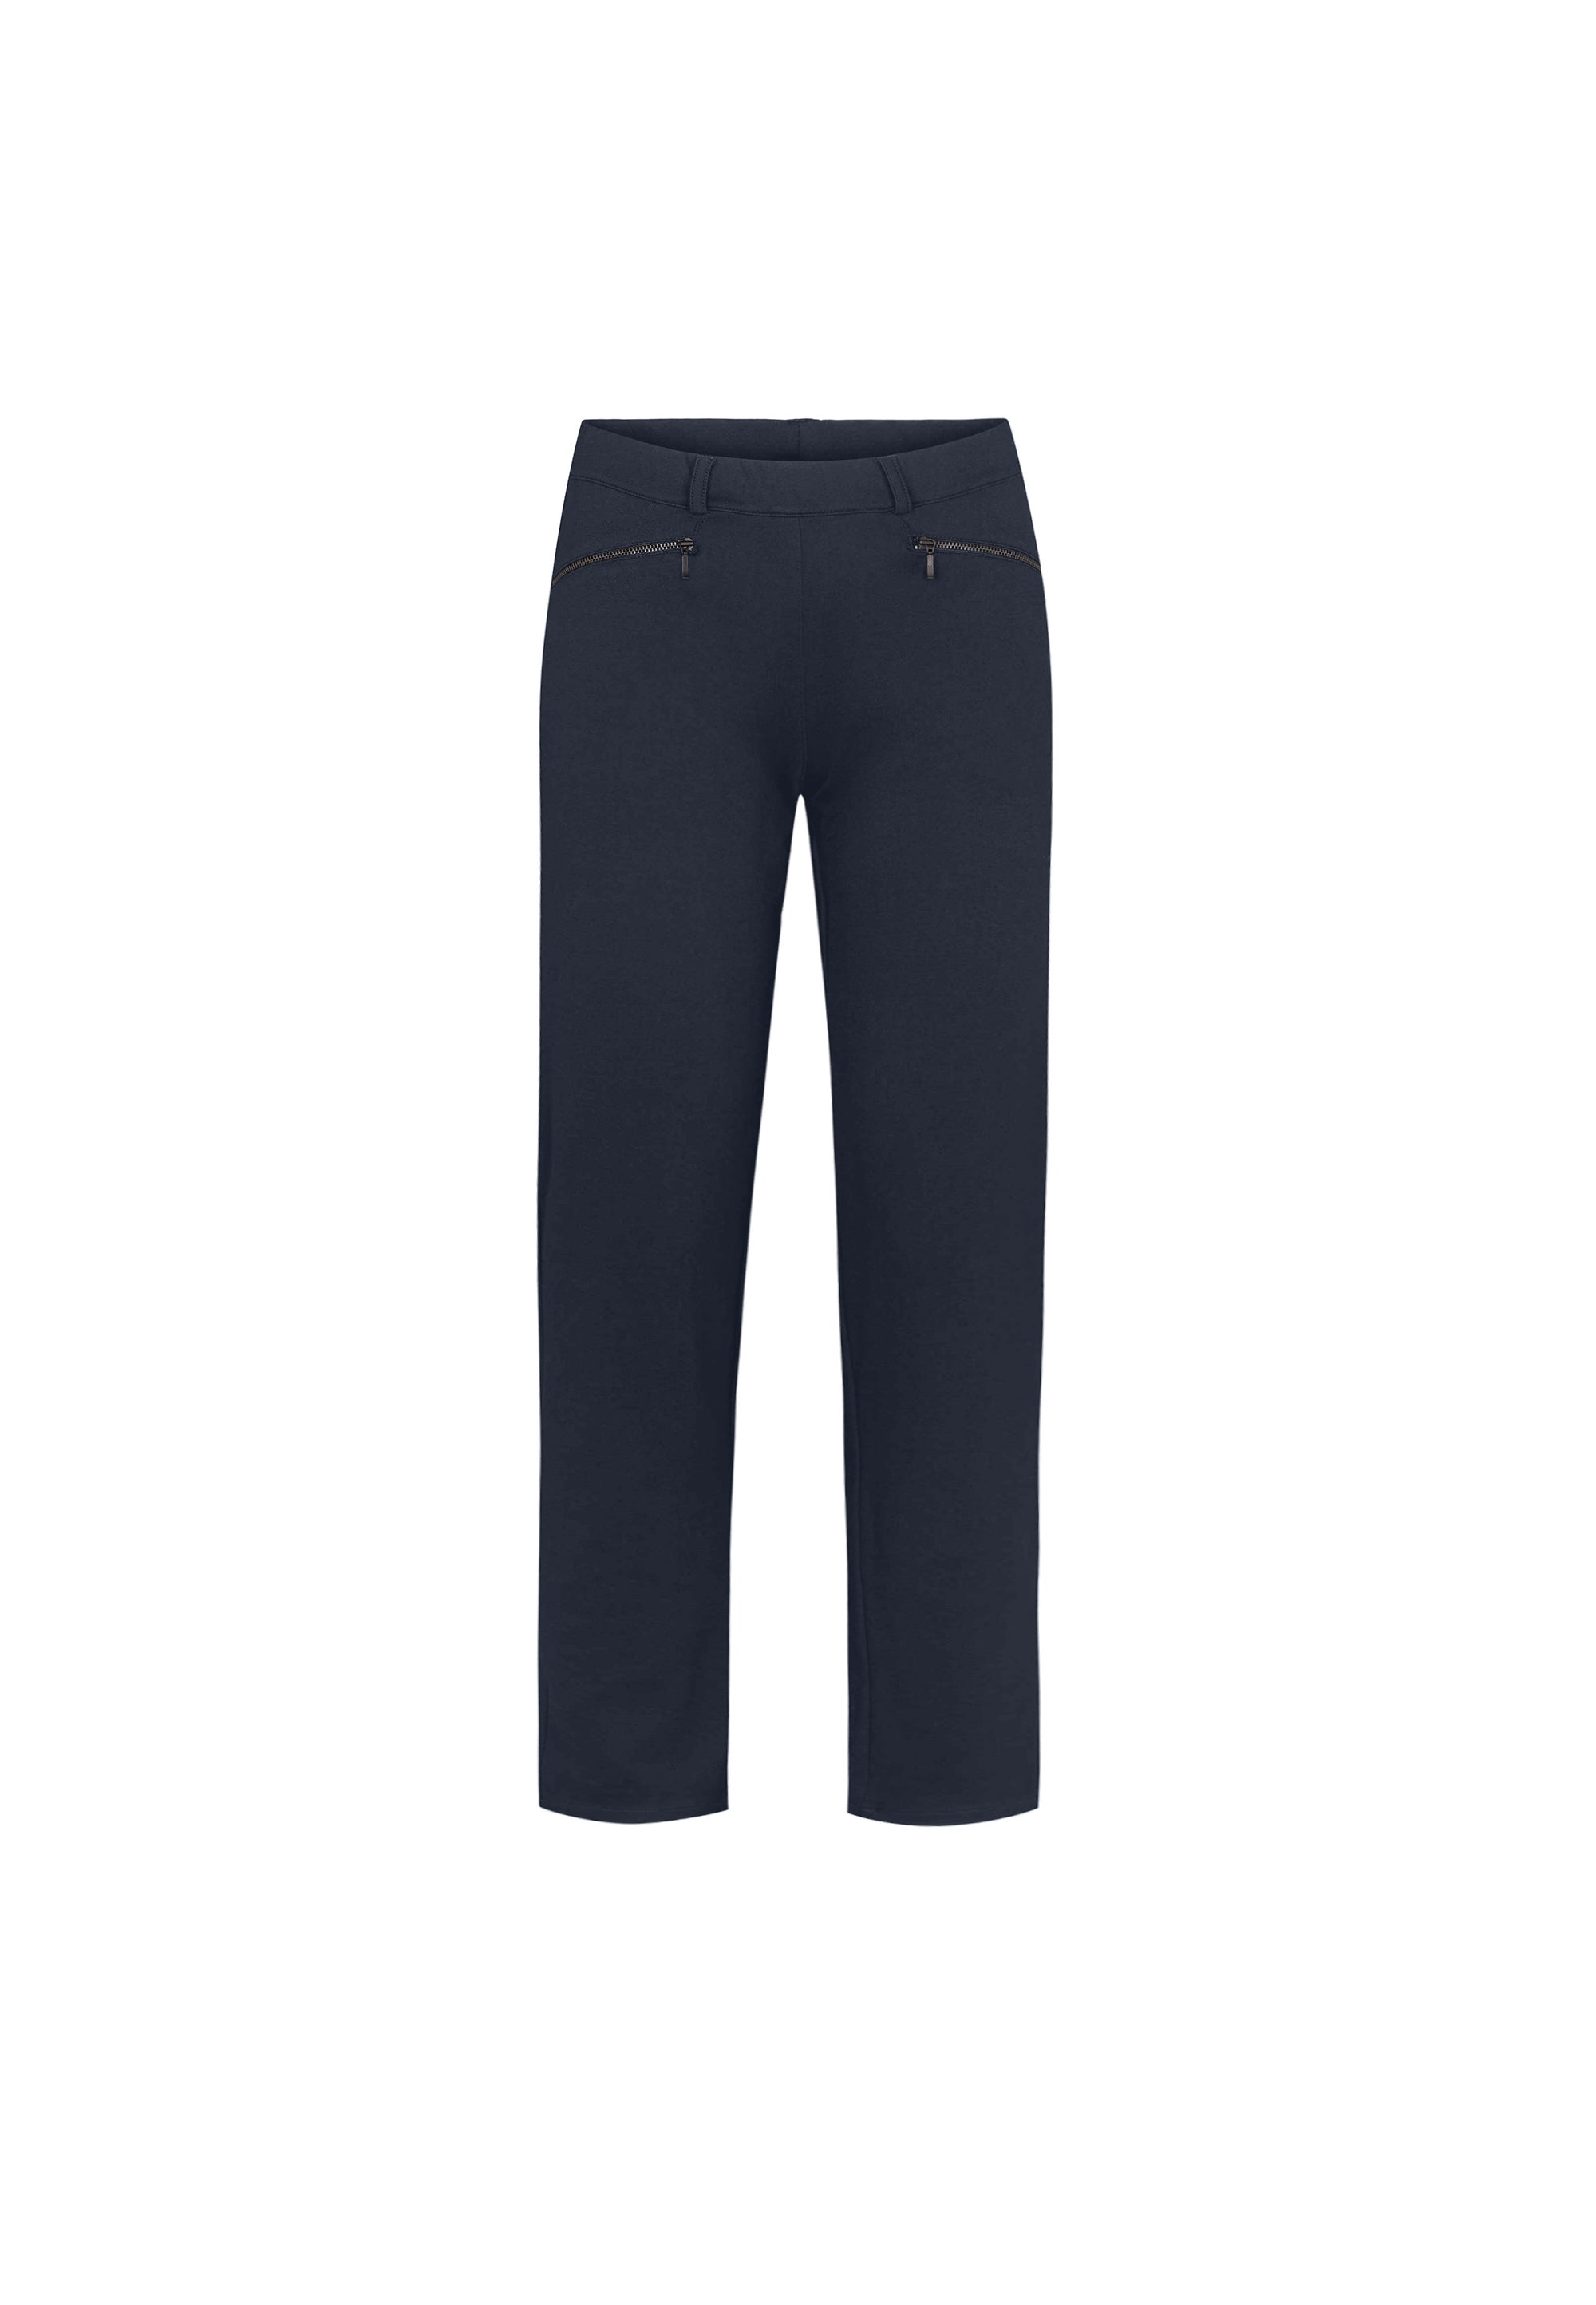 LAURIE Ruby Straight - Medium Length Trousers STRAIGHT 49103 Navy brushed